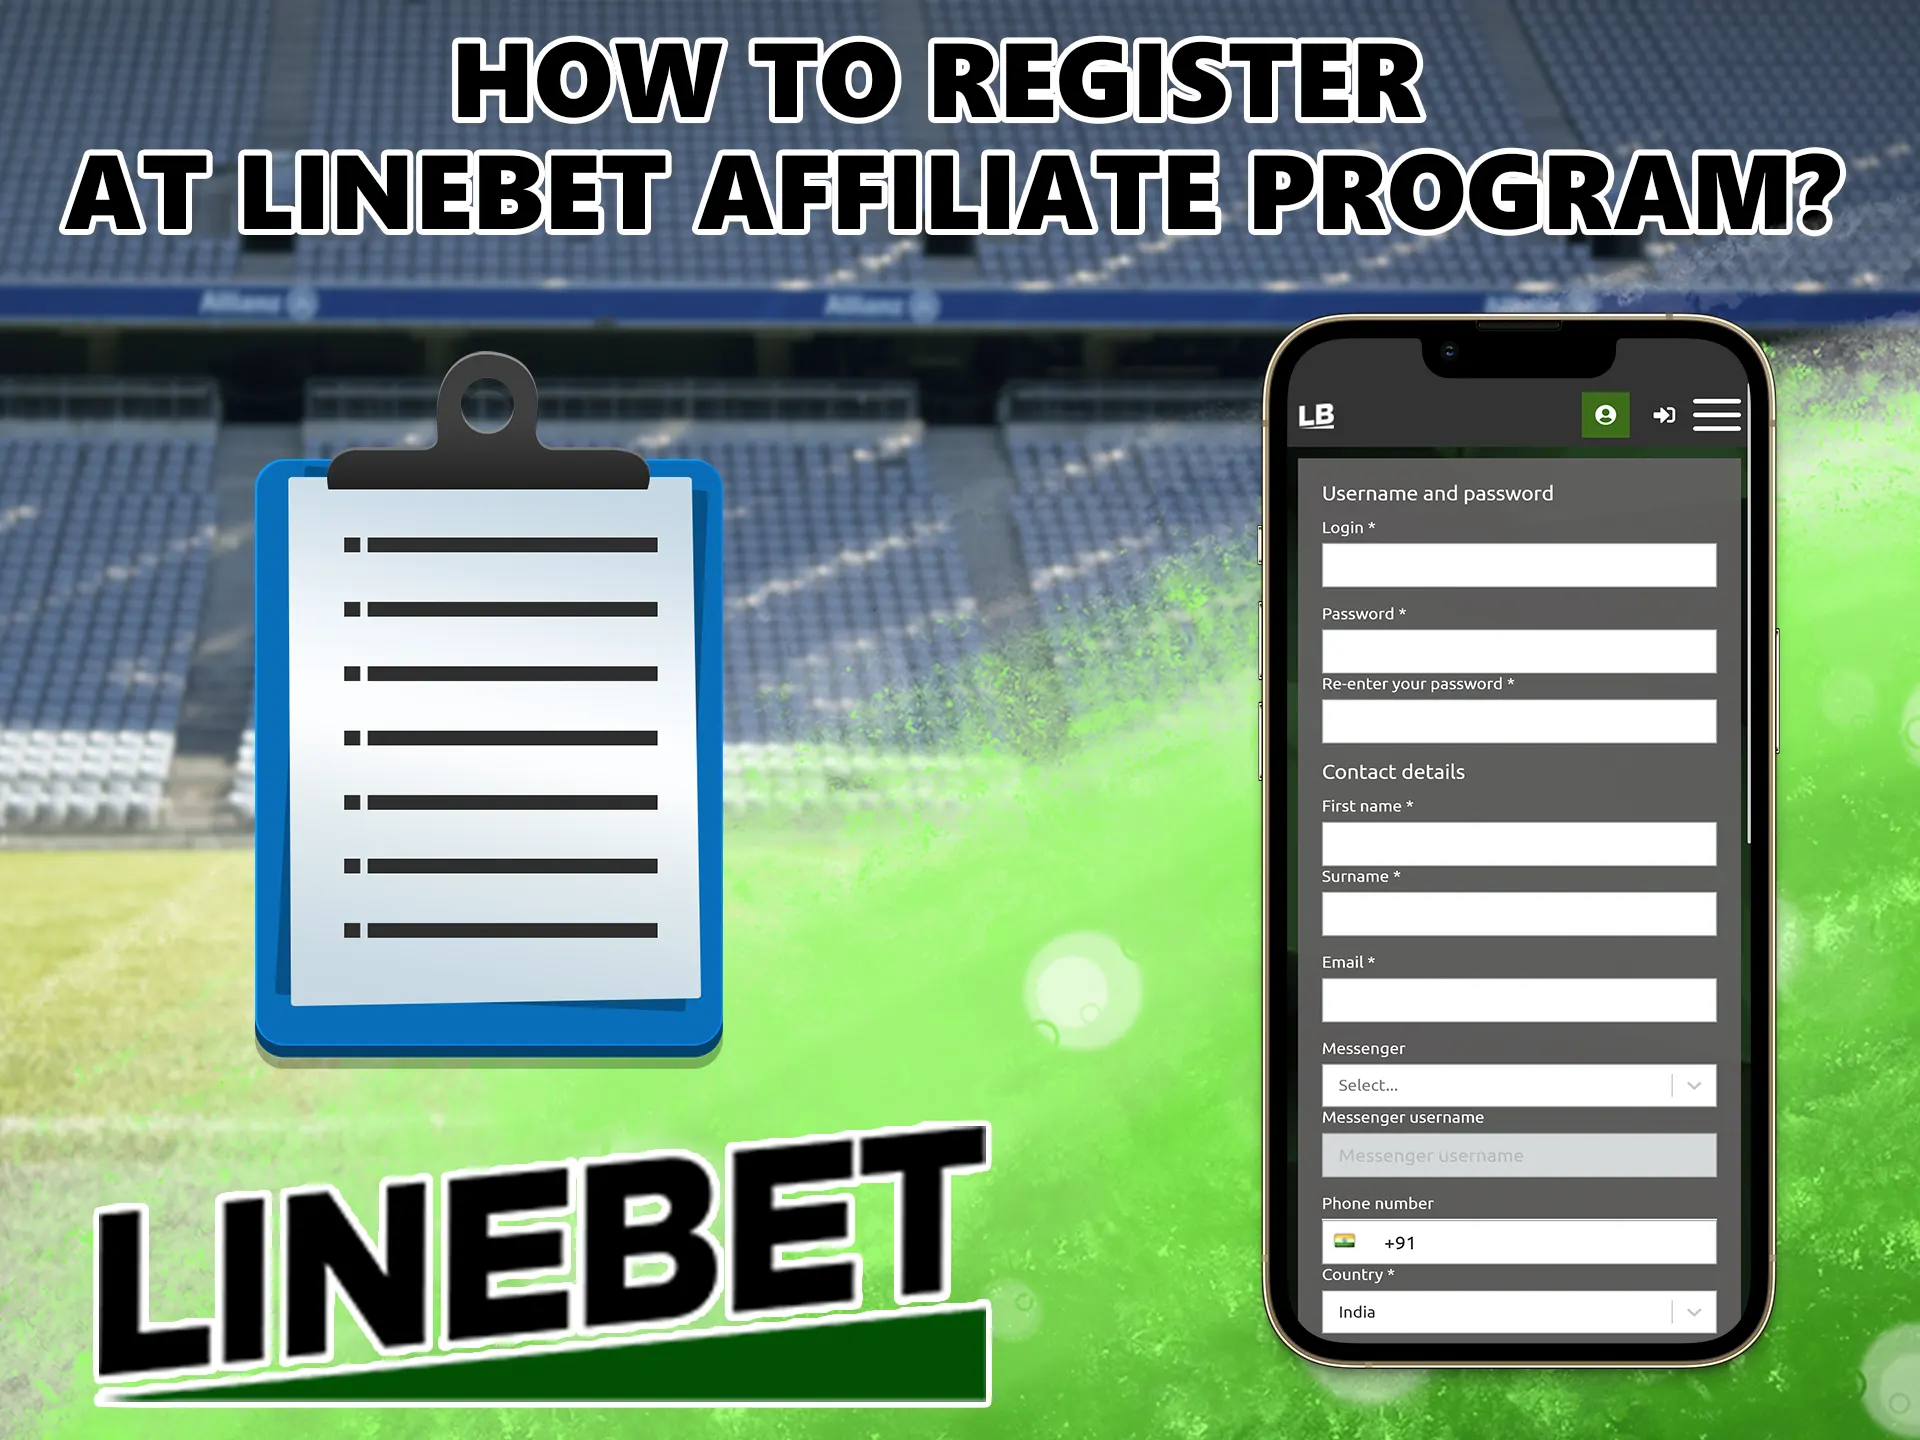 Any customer can easily become an affiliate by simply completing the Linebet affiliate registration procedure.